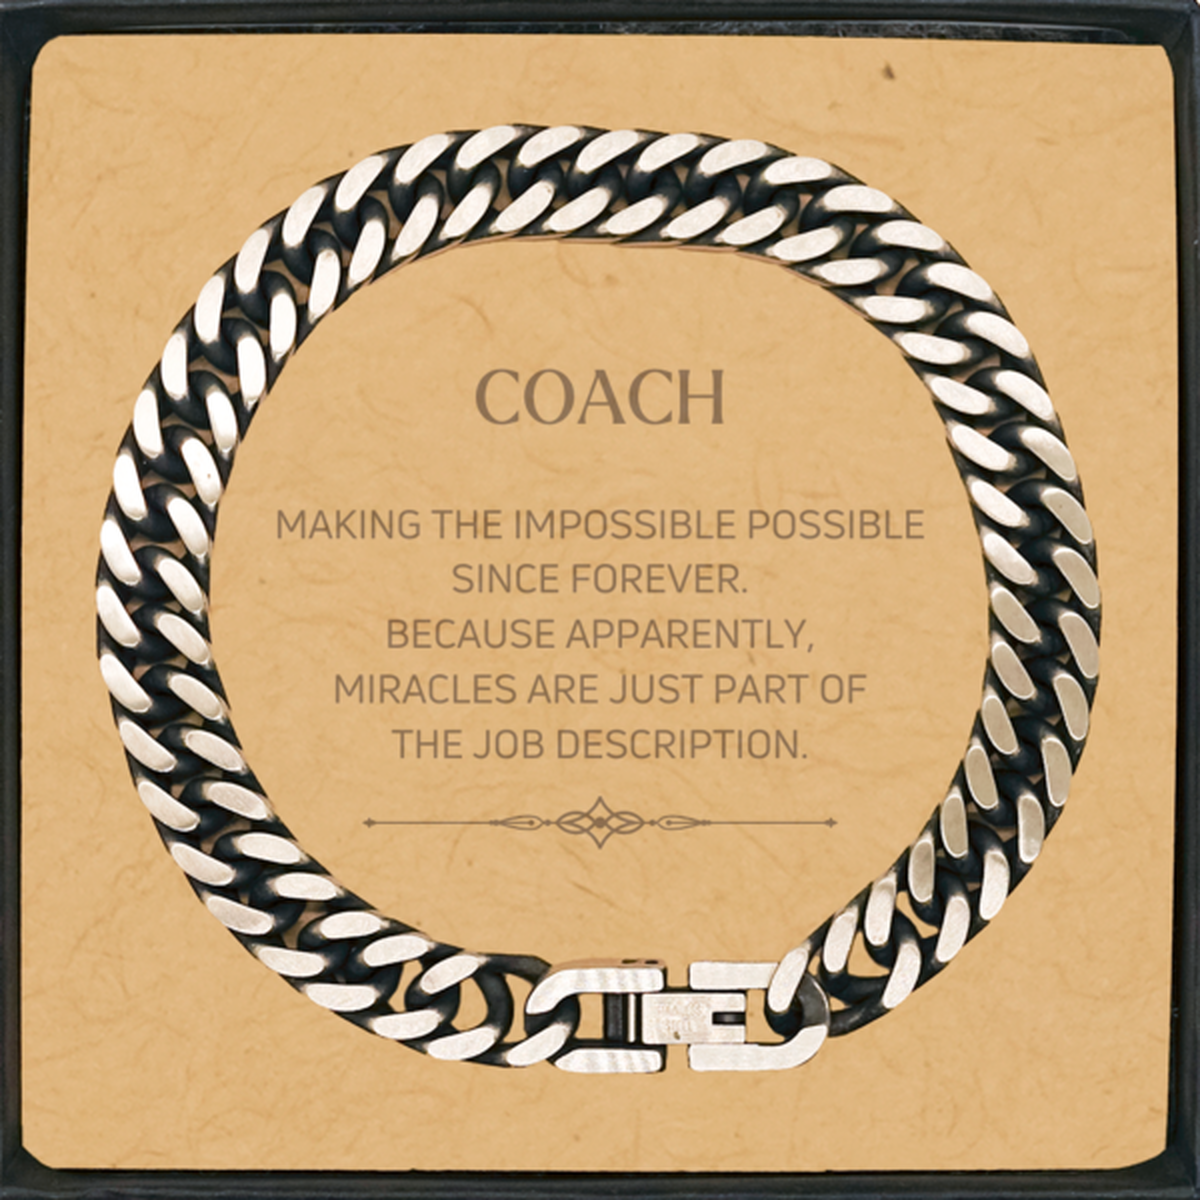 Funny Coach Gifts, Miracles are just part of the job description, Inspirational Birthday Cuban Link Chain Bracelet For Coach, Men, Women, Coworkers, Friends, Boss